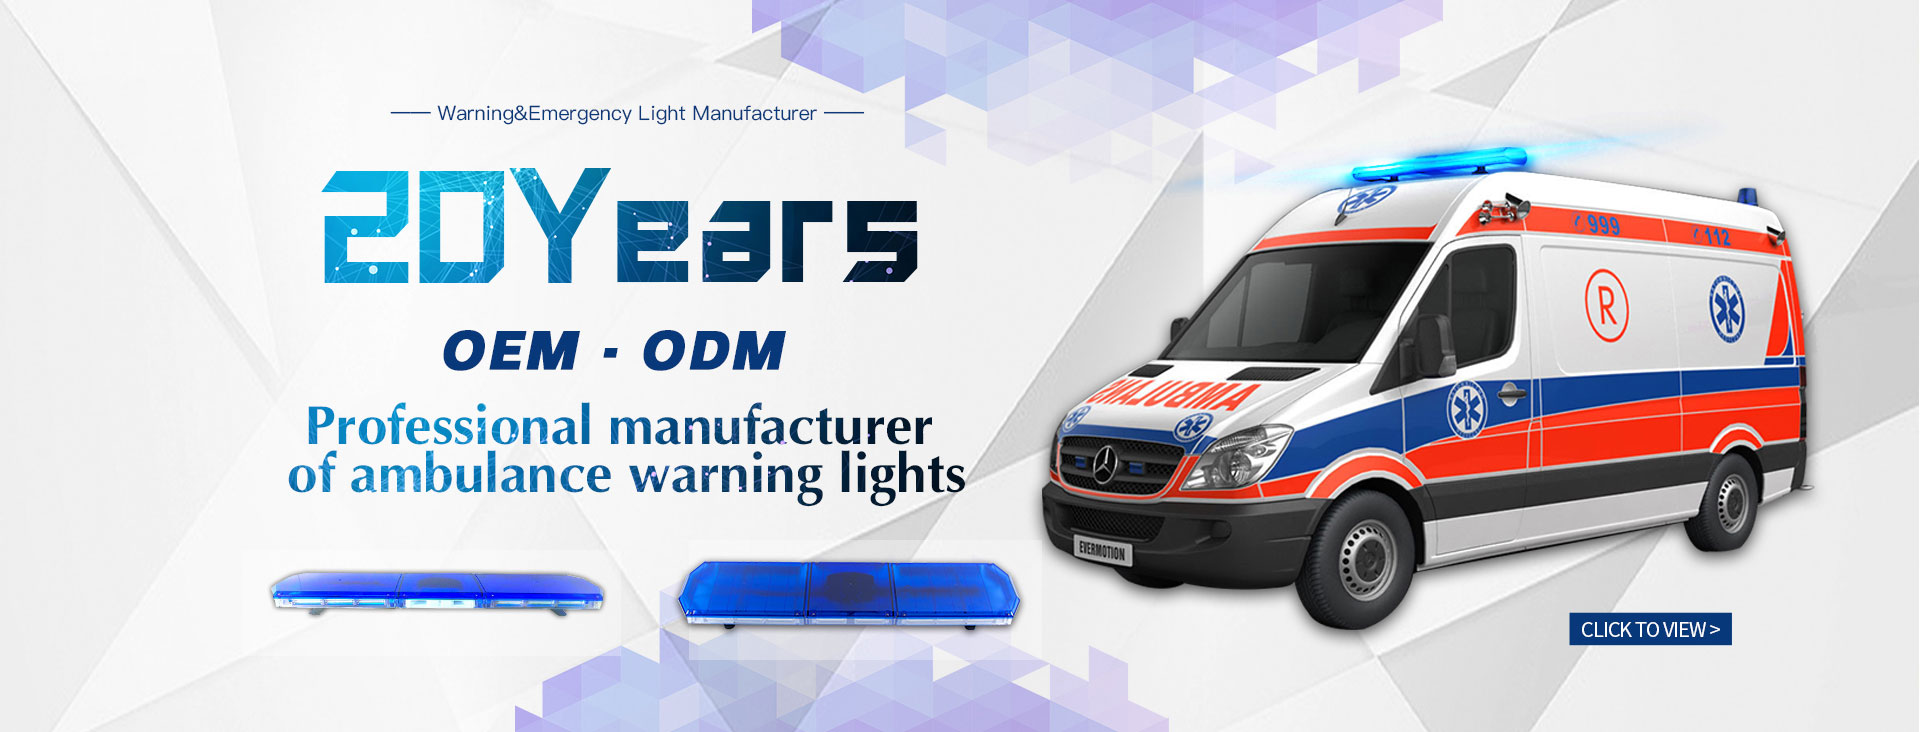 Xiongke in great success in the field of warning lights and car  modification lights.police flashing lights,blue lights bar,led amber lights,Dongguan  Xiongke Electronic Technology Co., Ltd.,skautoled